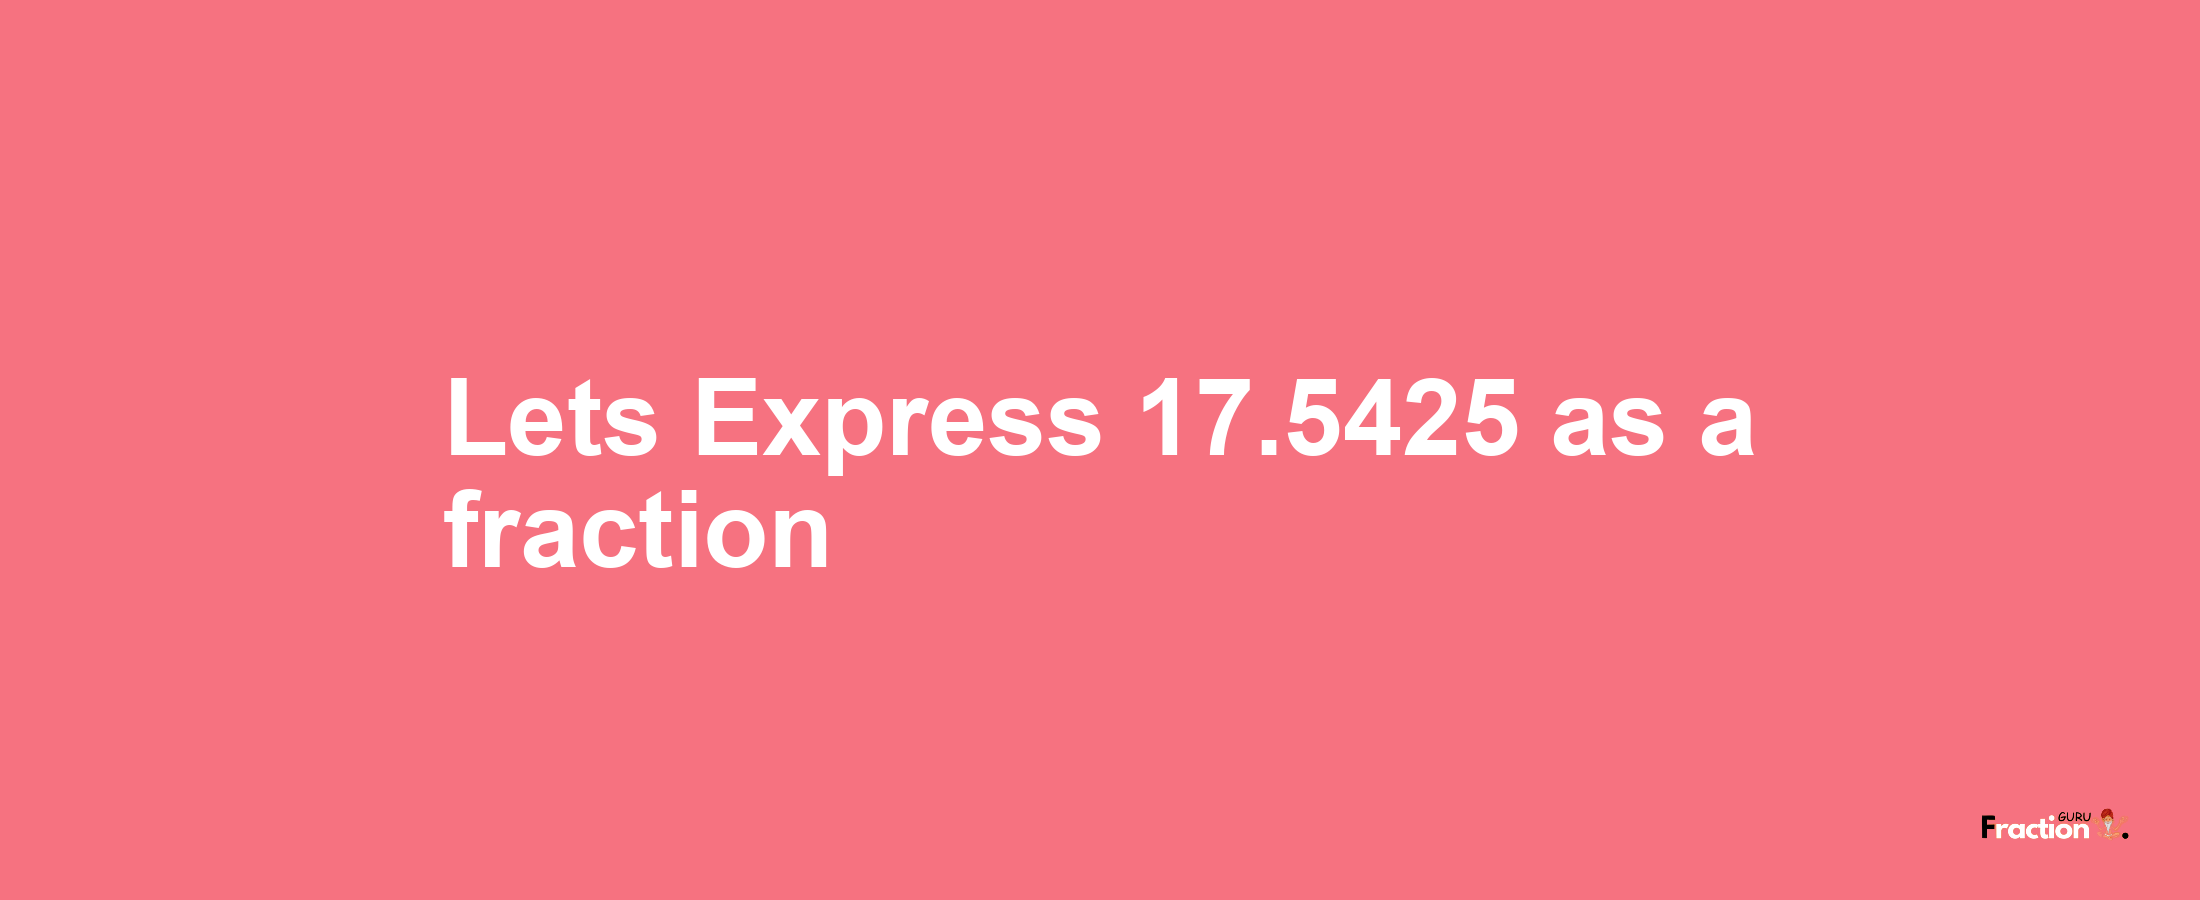 Lets Express 17.5425 as afraction